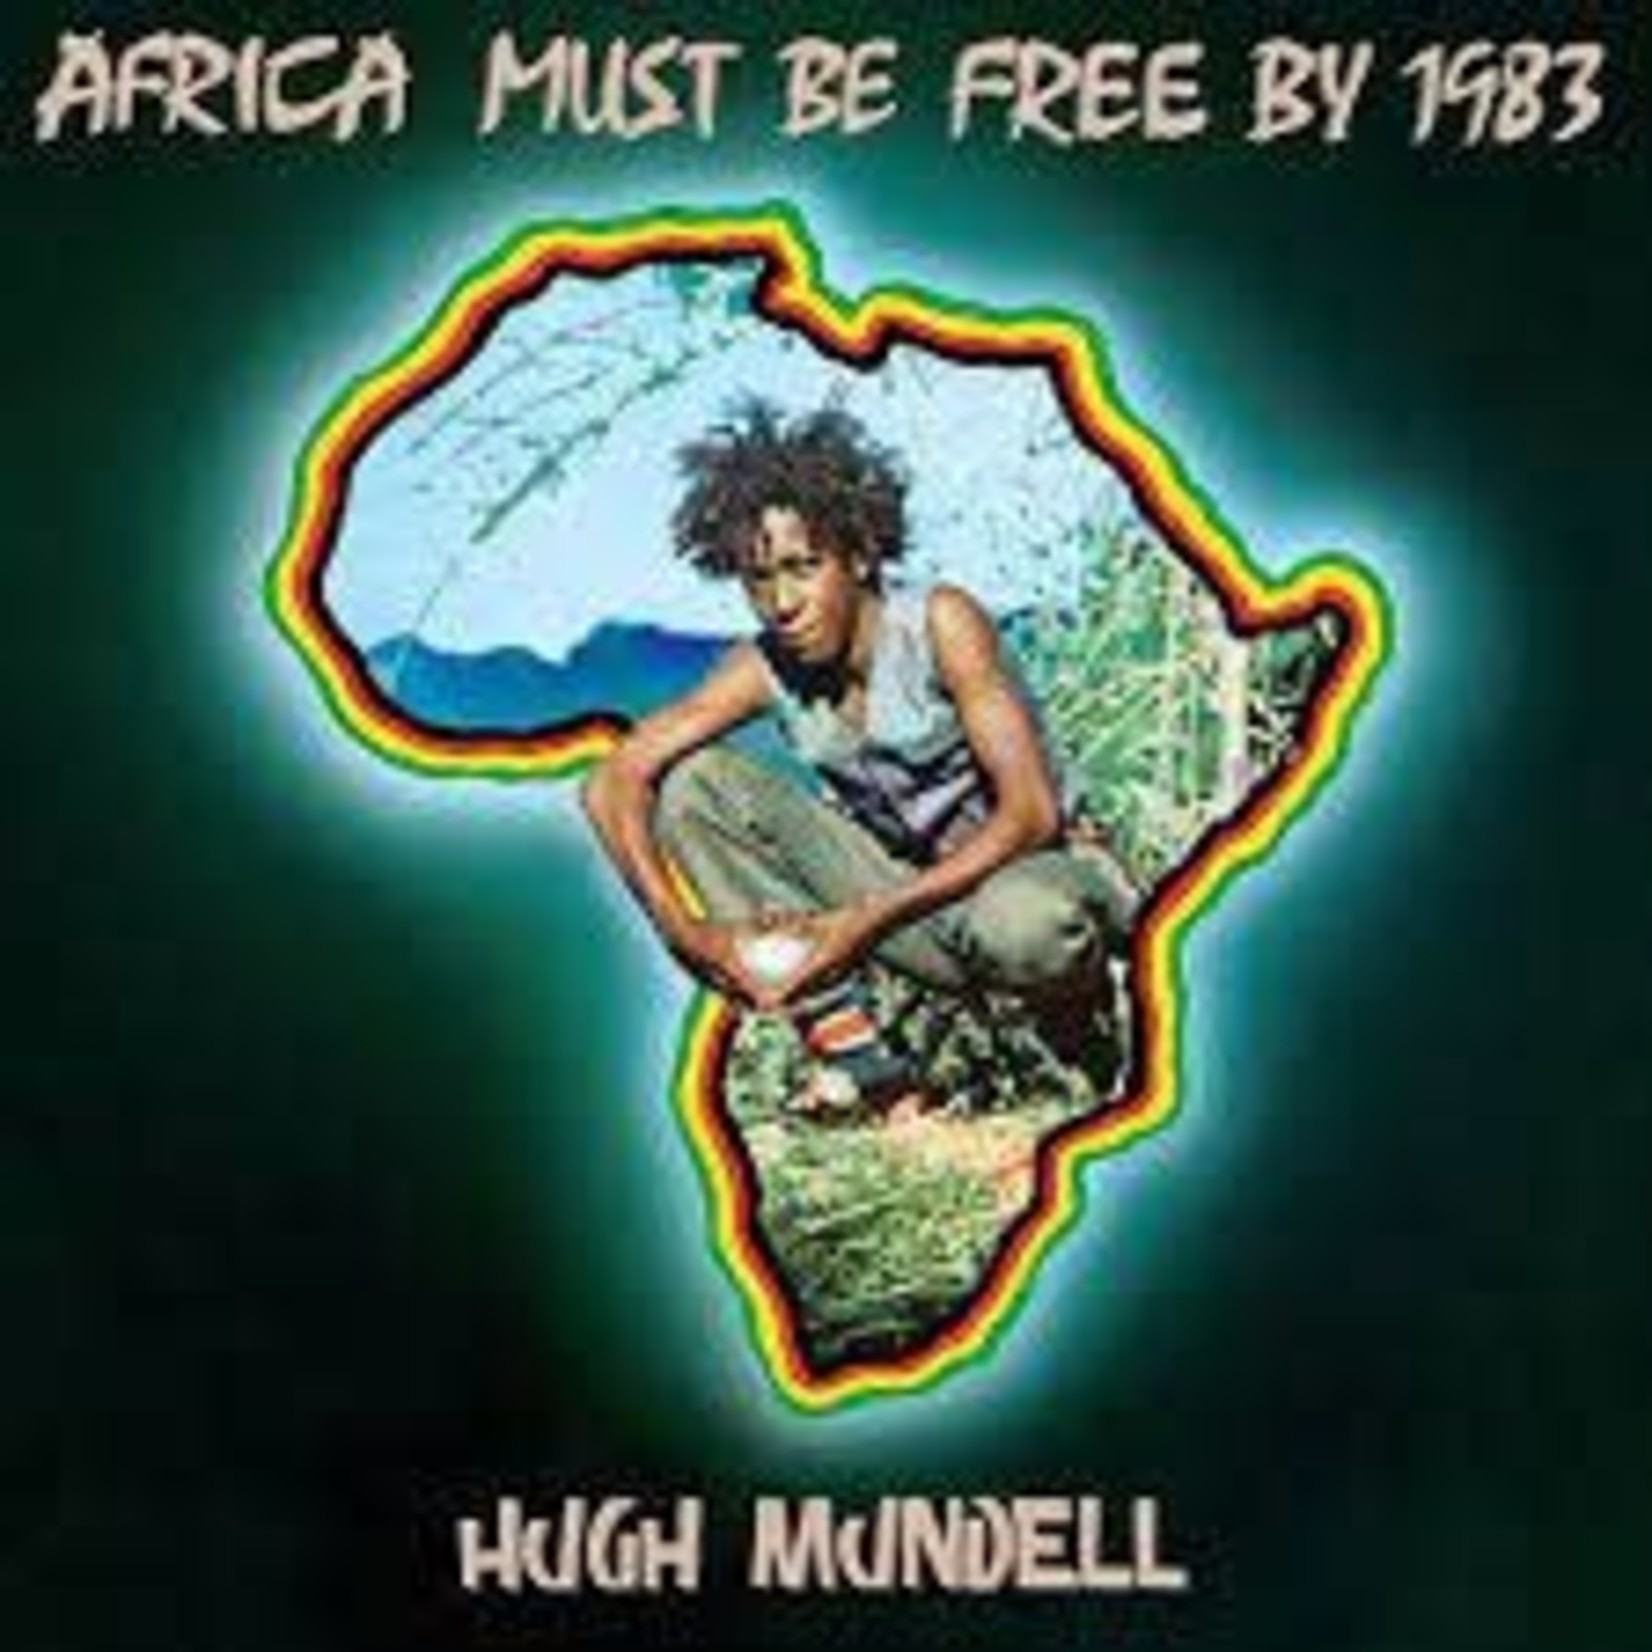 [New] Hugh Mundell - Africa Must Be Free By 1983